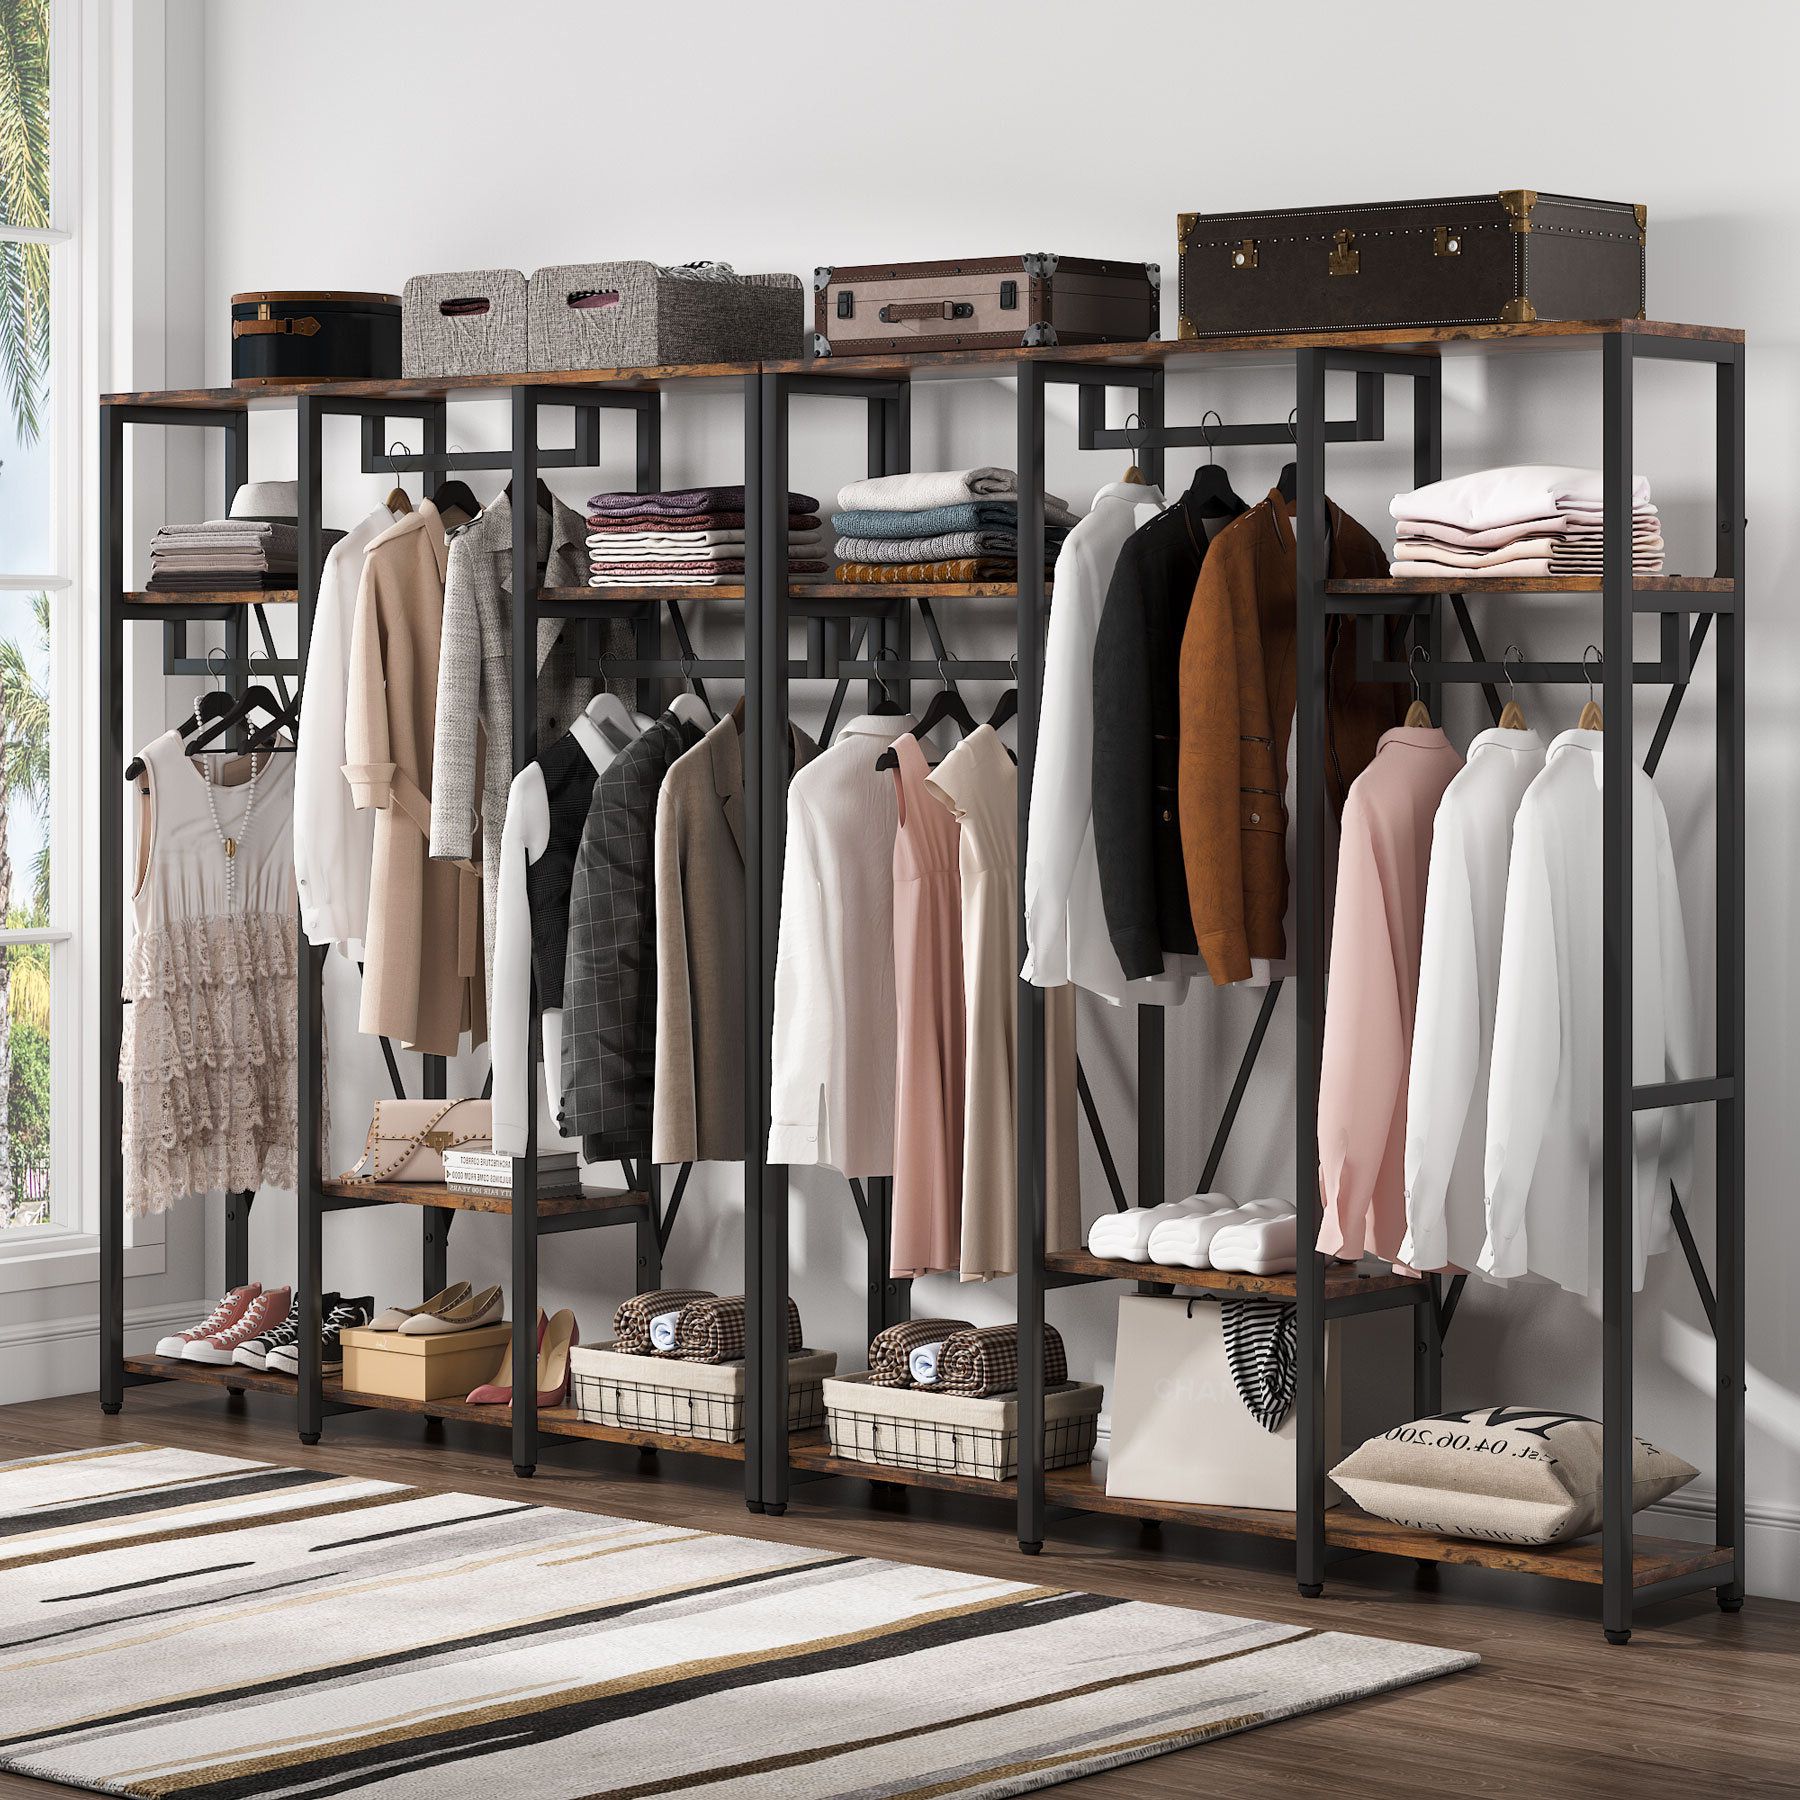 17 Stories Gambrill 59.05'' Closet System & Reviews | Wayfair In Wardrobes With Garment Rod (Gallery 4 of 20)